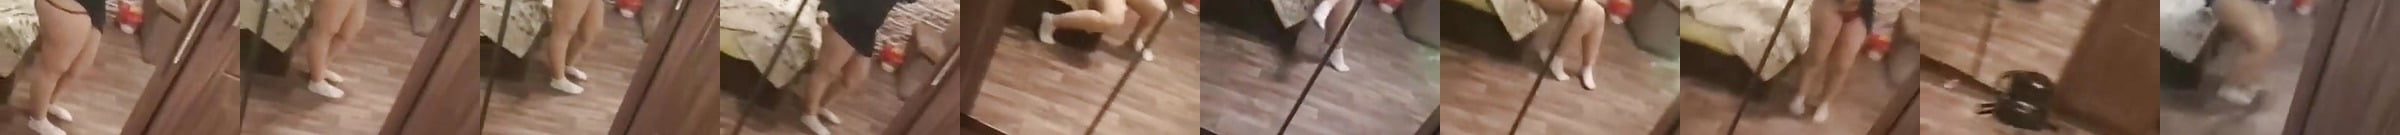 Featured Arab Syrian Couple Tango Live Porn Videos Xhamster